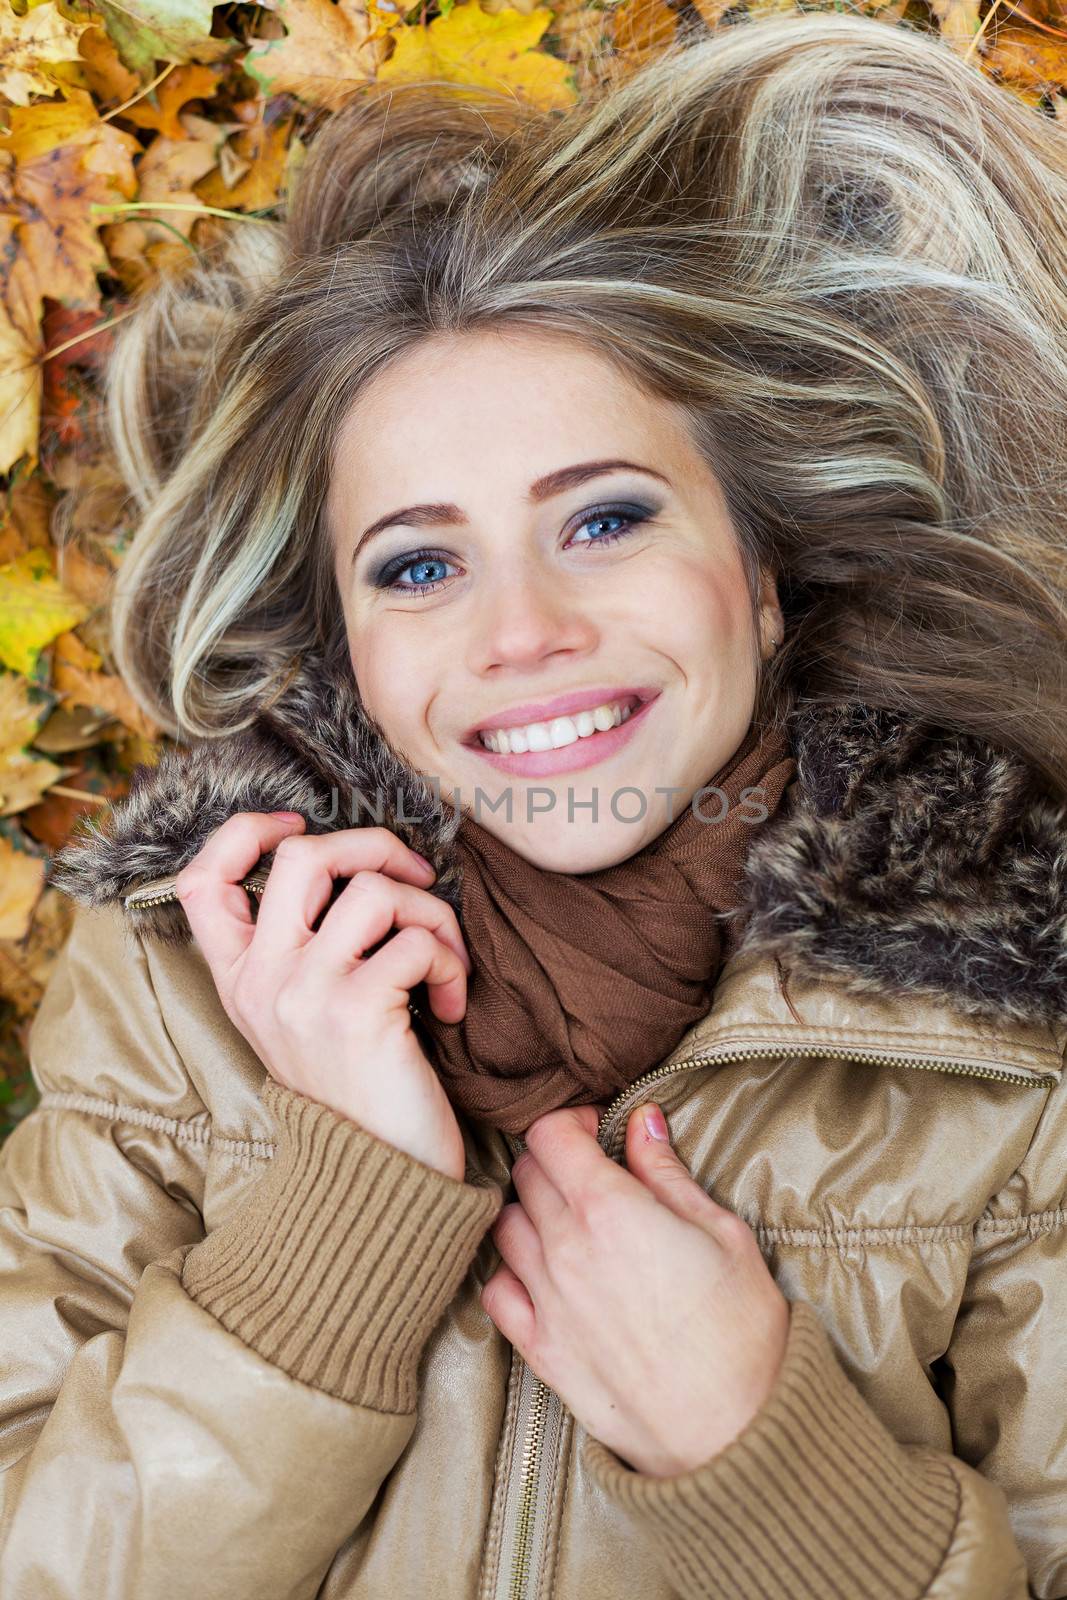 Closeup portrait of a nice young woman surrounded by autumn leaves